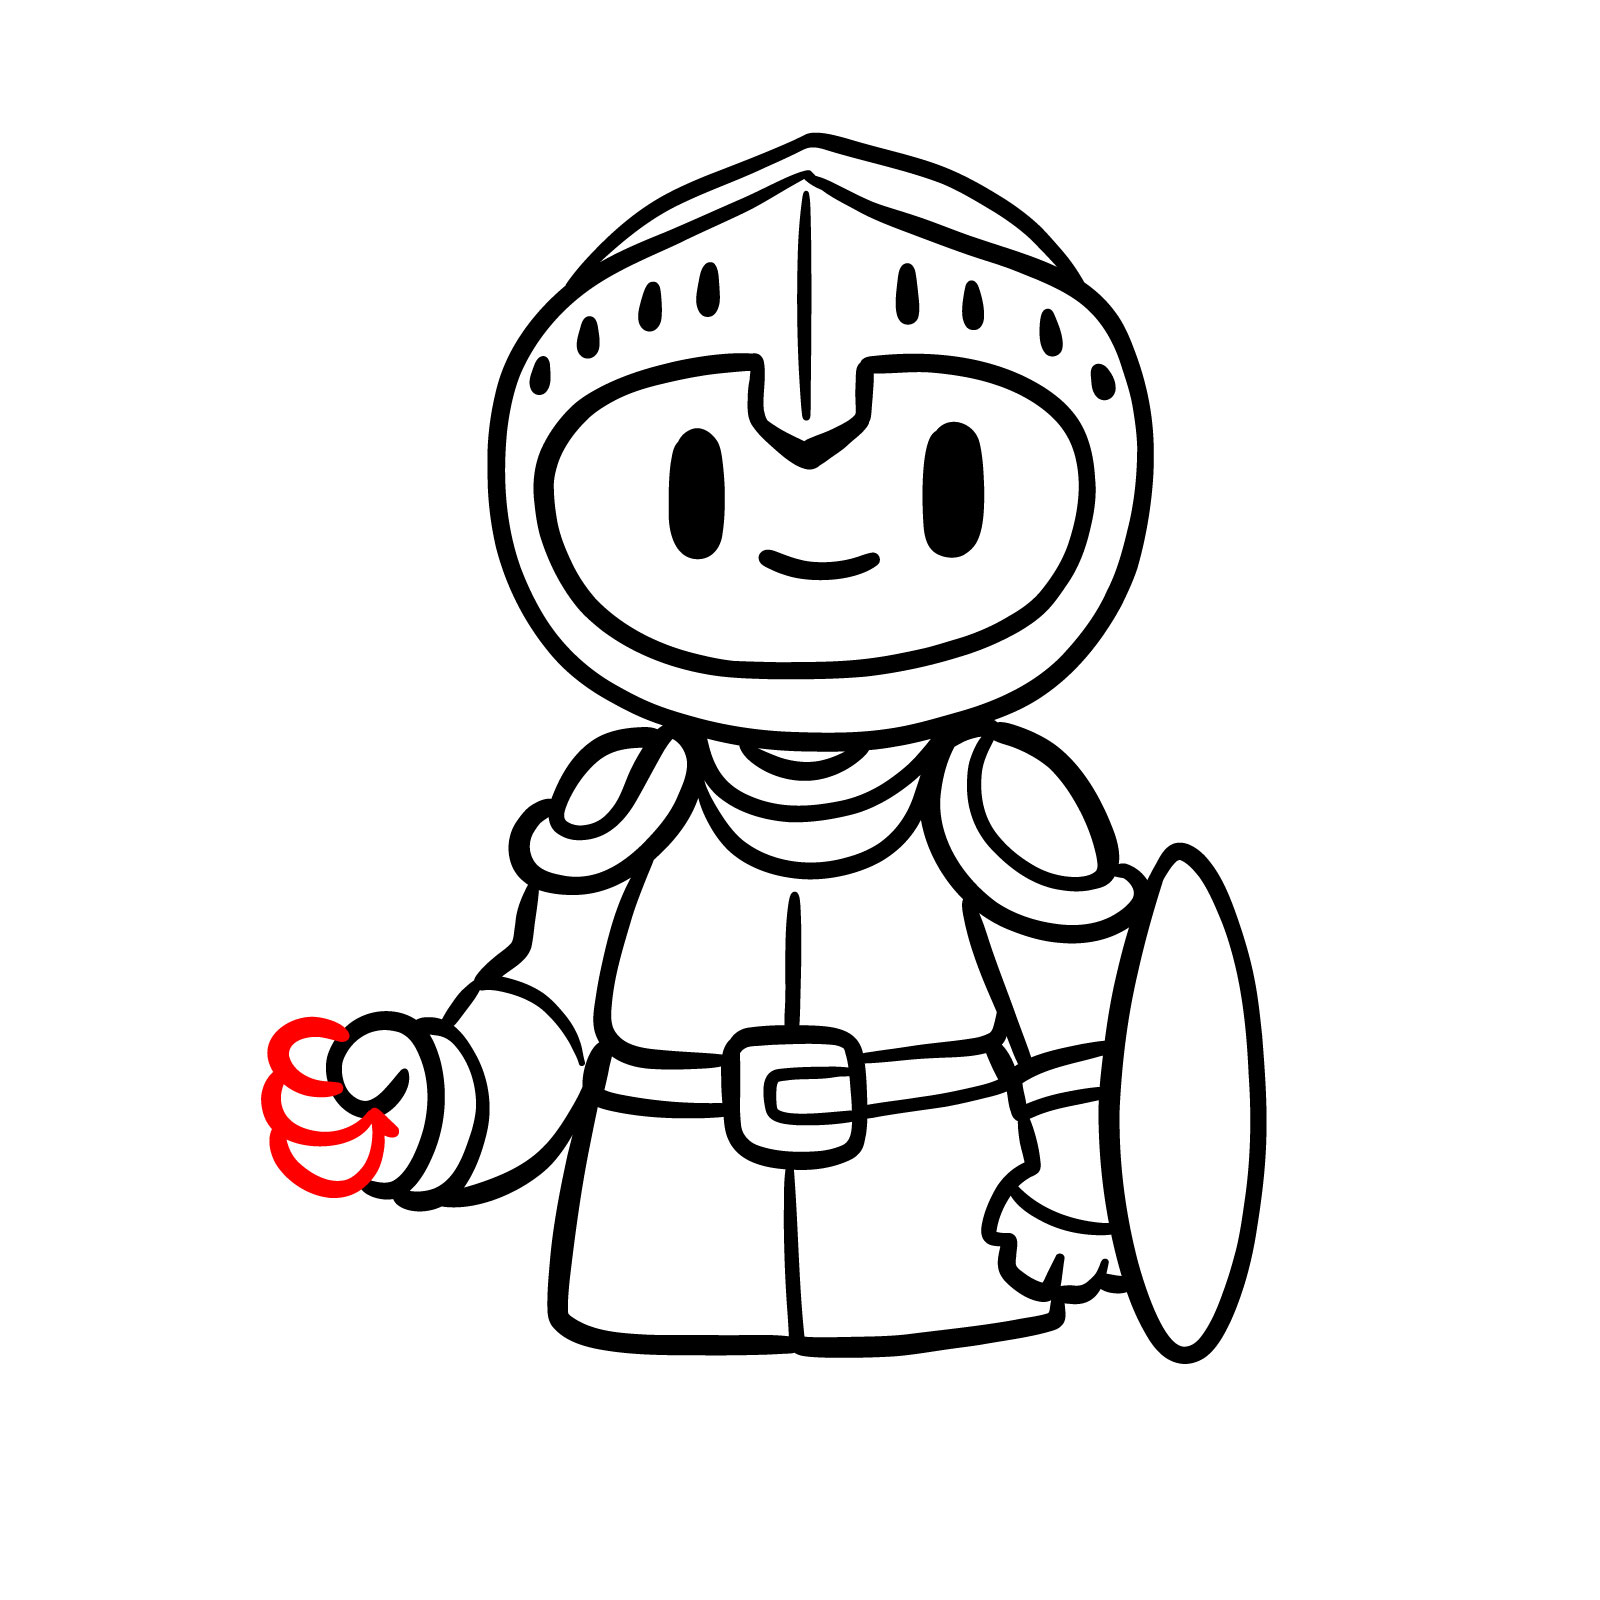 Easy paladin drawing step 10: sketching remaining fingers